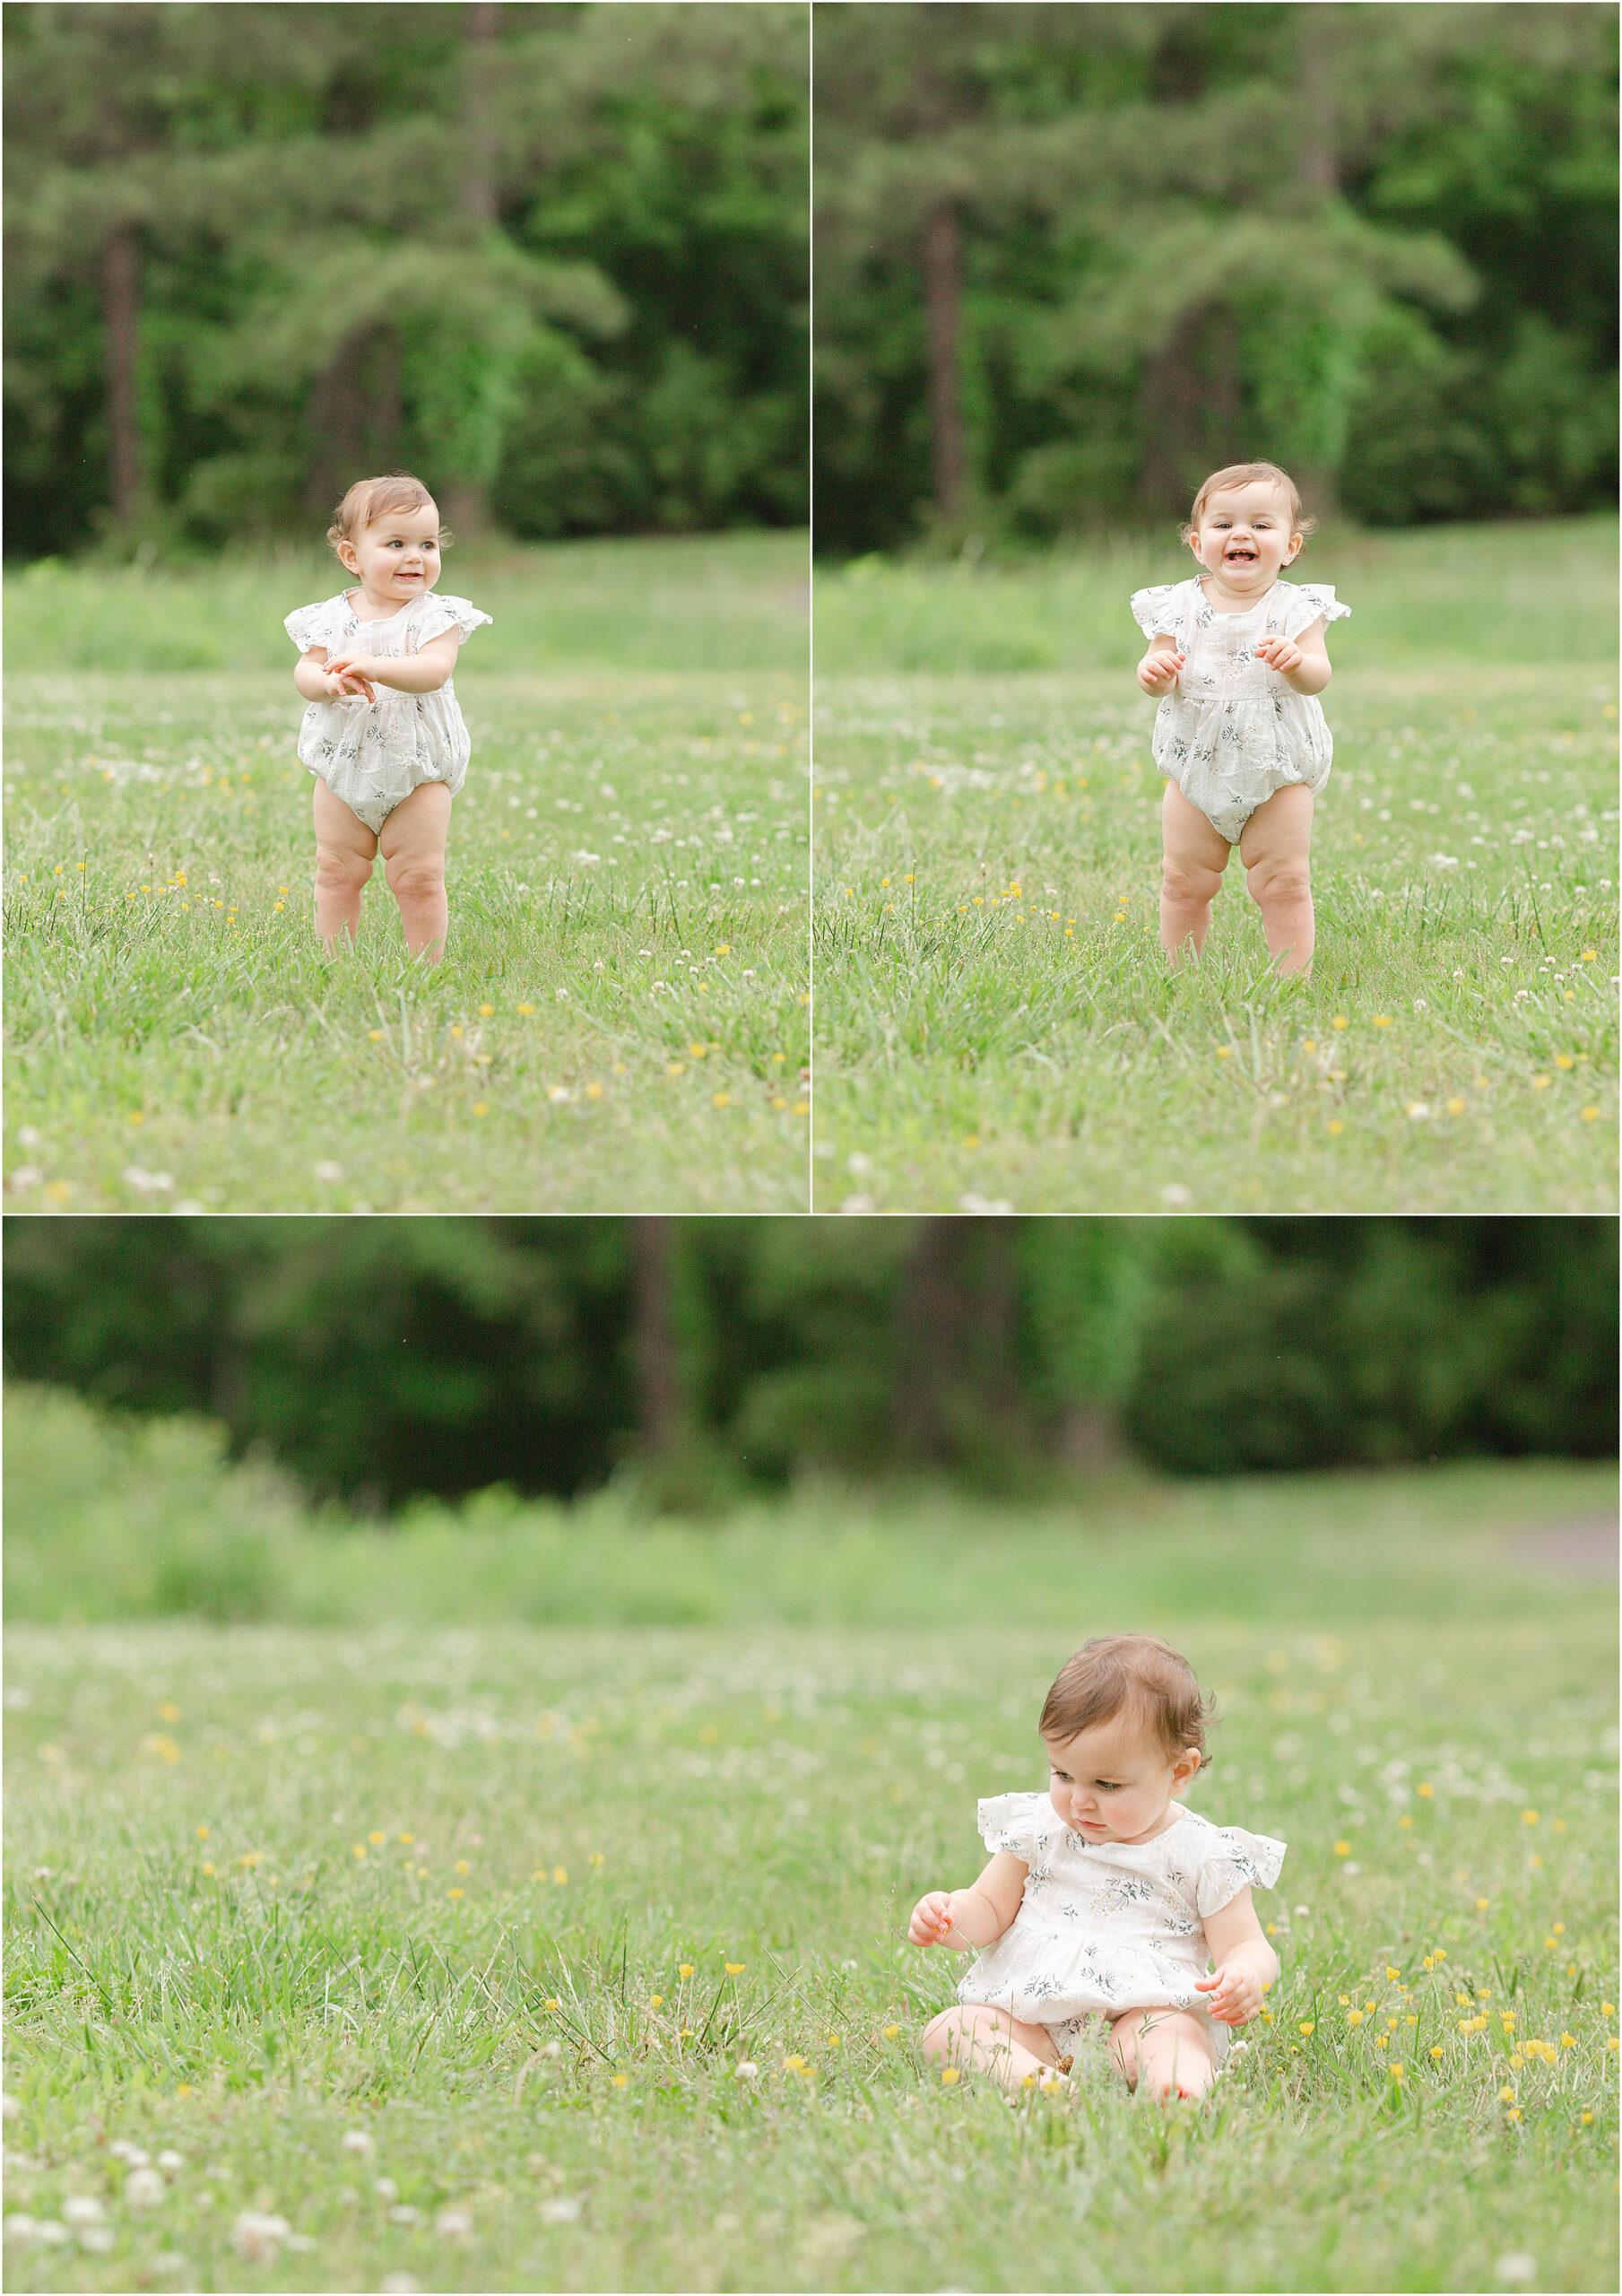 A smiling one year old girl stands and sits in the green grass